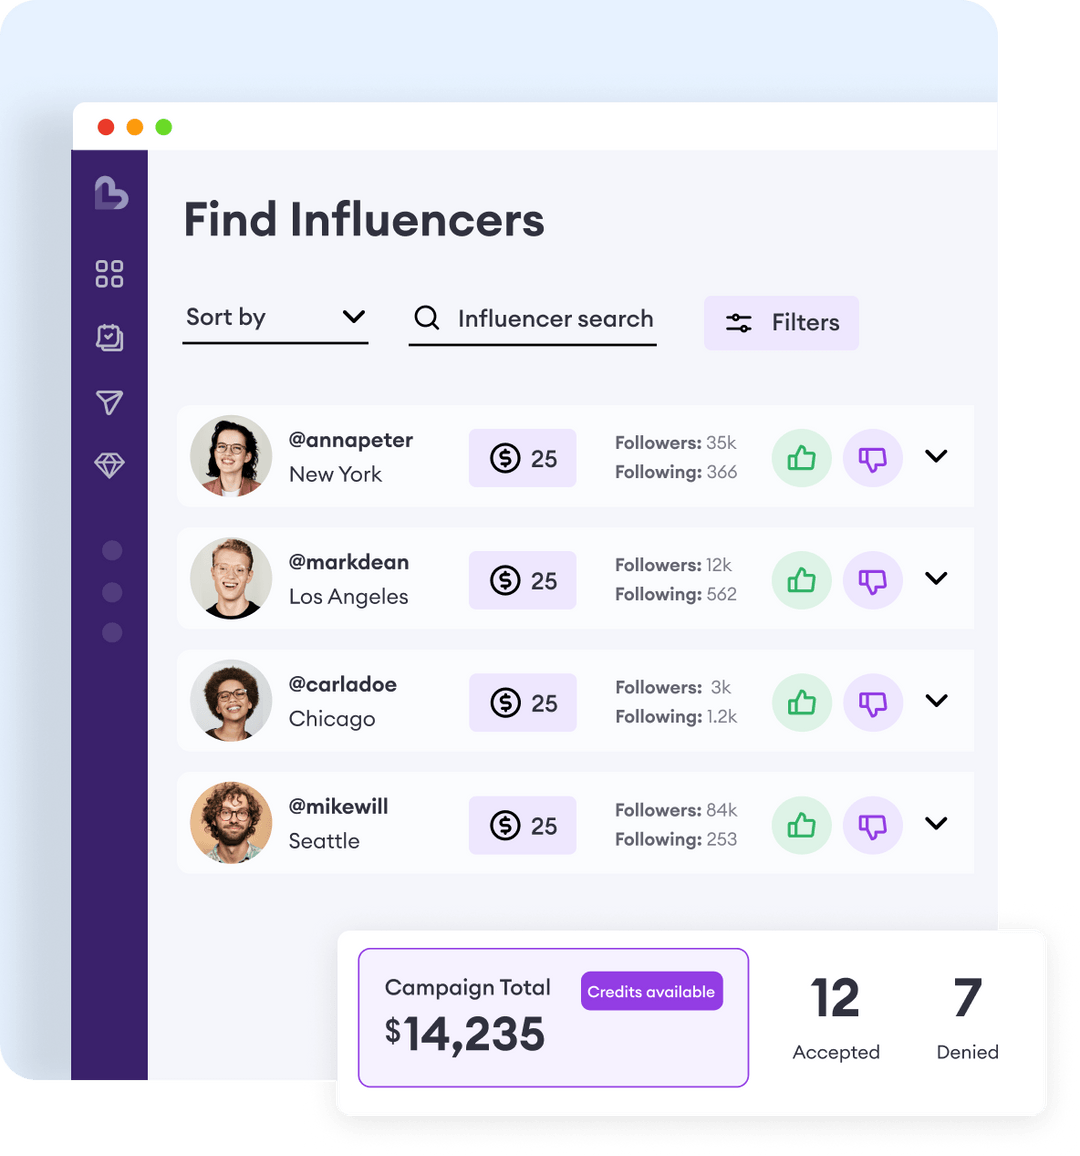 Our technology uses your strategy to identify the best Influencers through its hyper-intelligent search engine. Think of it like a dating app - you tell us what you're looking for, and we find you candidates that meet those criteria.